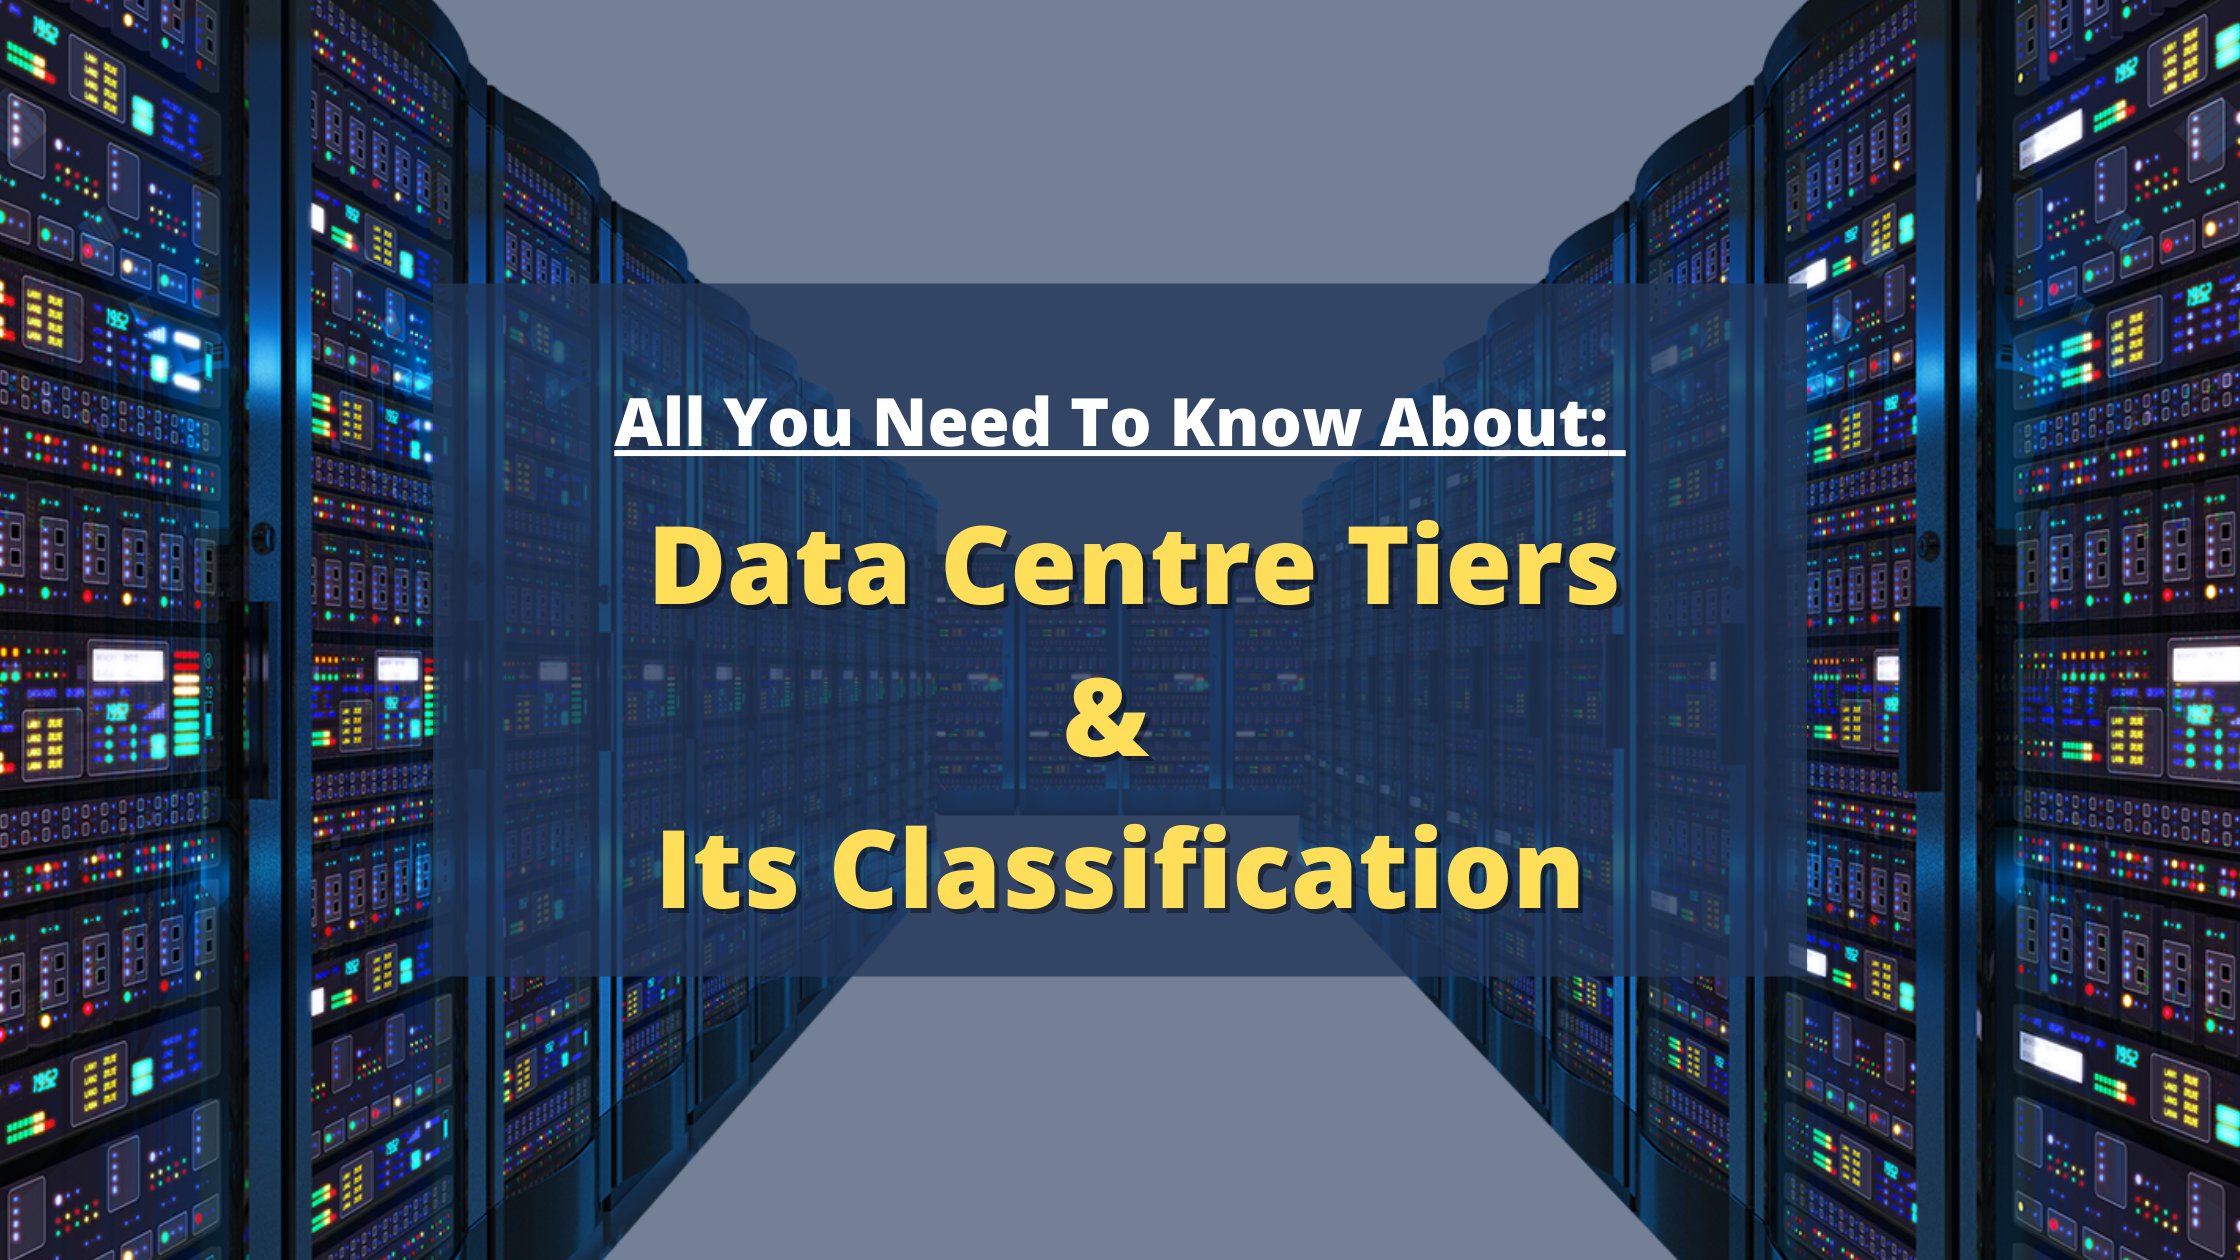 All you need to know about Data Centre Tiers & its Classification